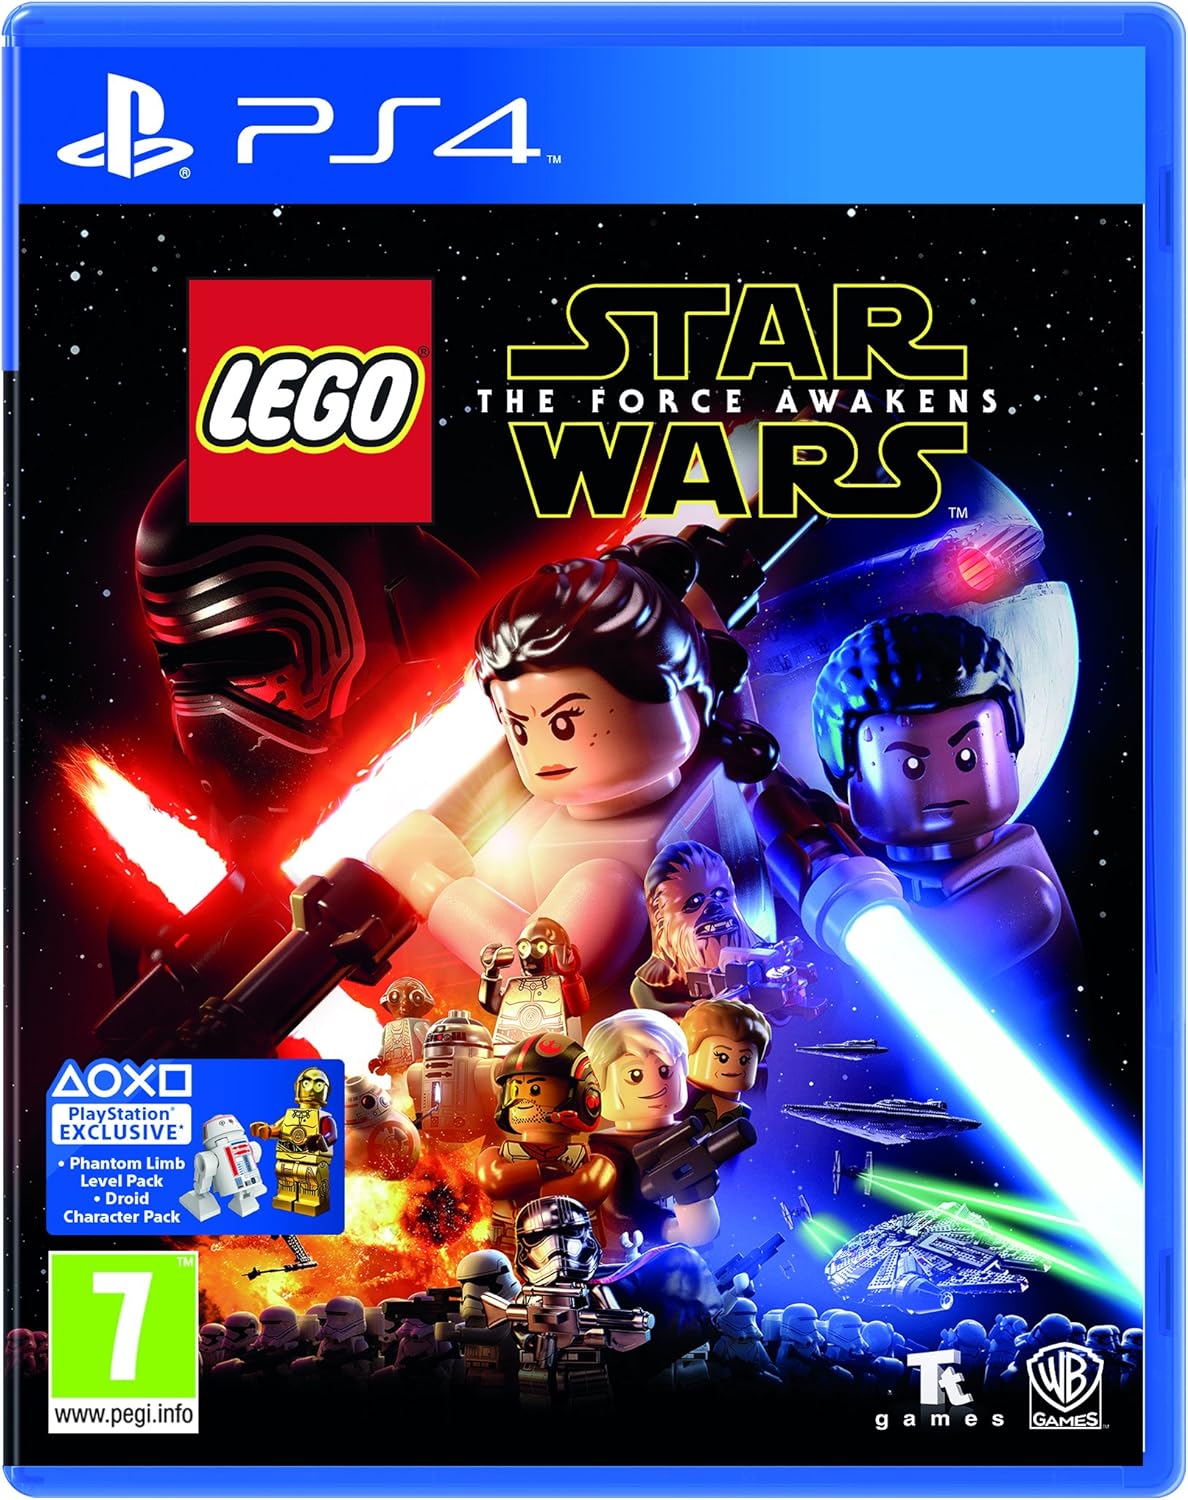 Lego Star Wars: The Force Awakens Playstation 4